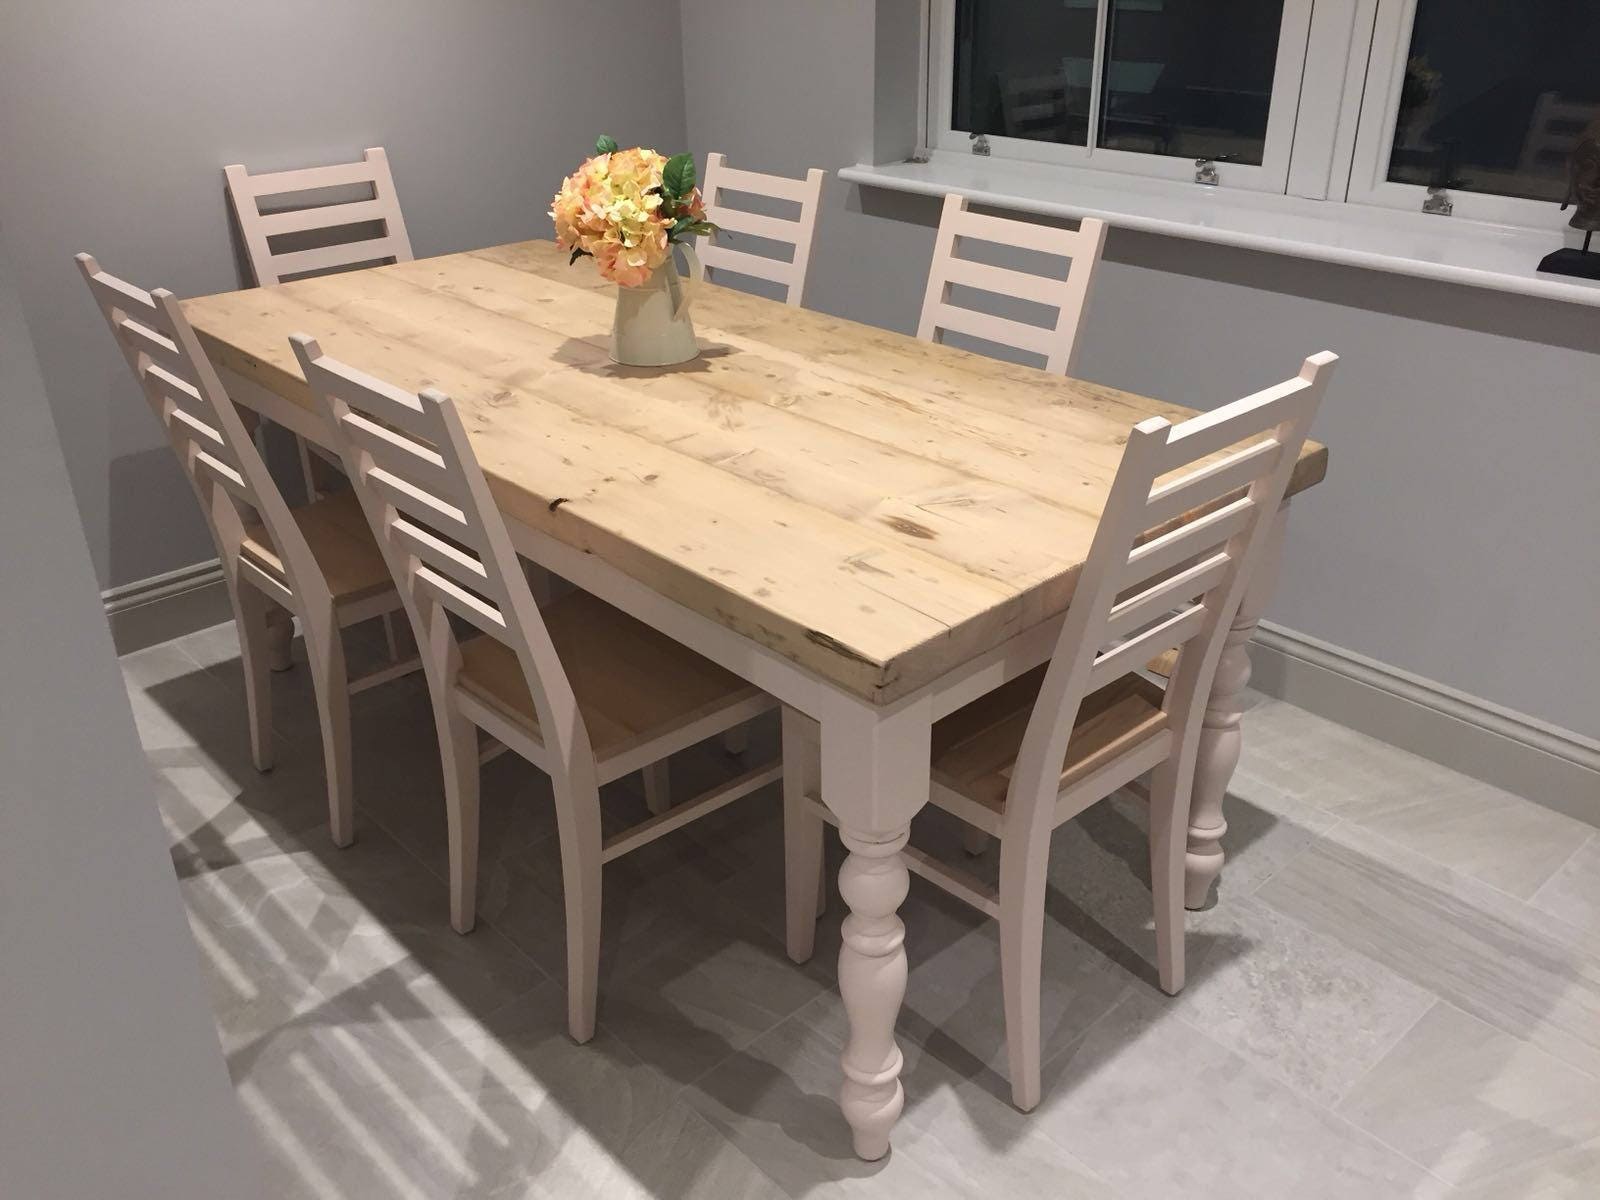 6ft Farmhouse Dining Table With Reclaimed Wood Top And 6 Etsy